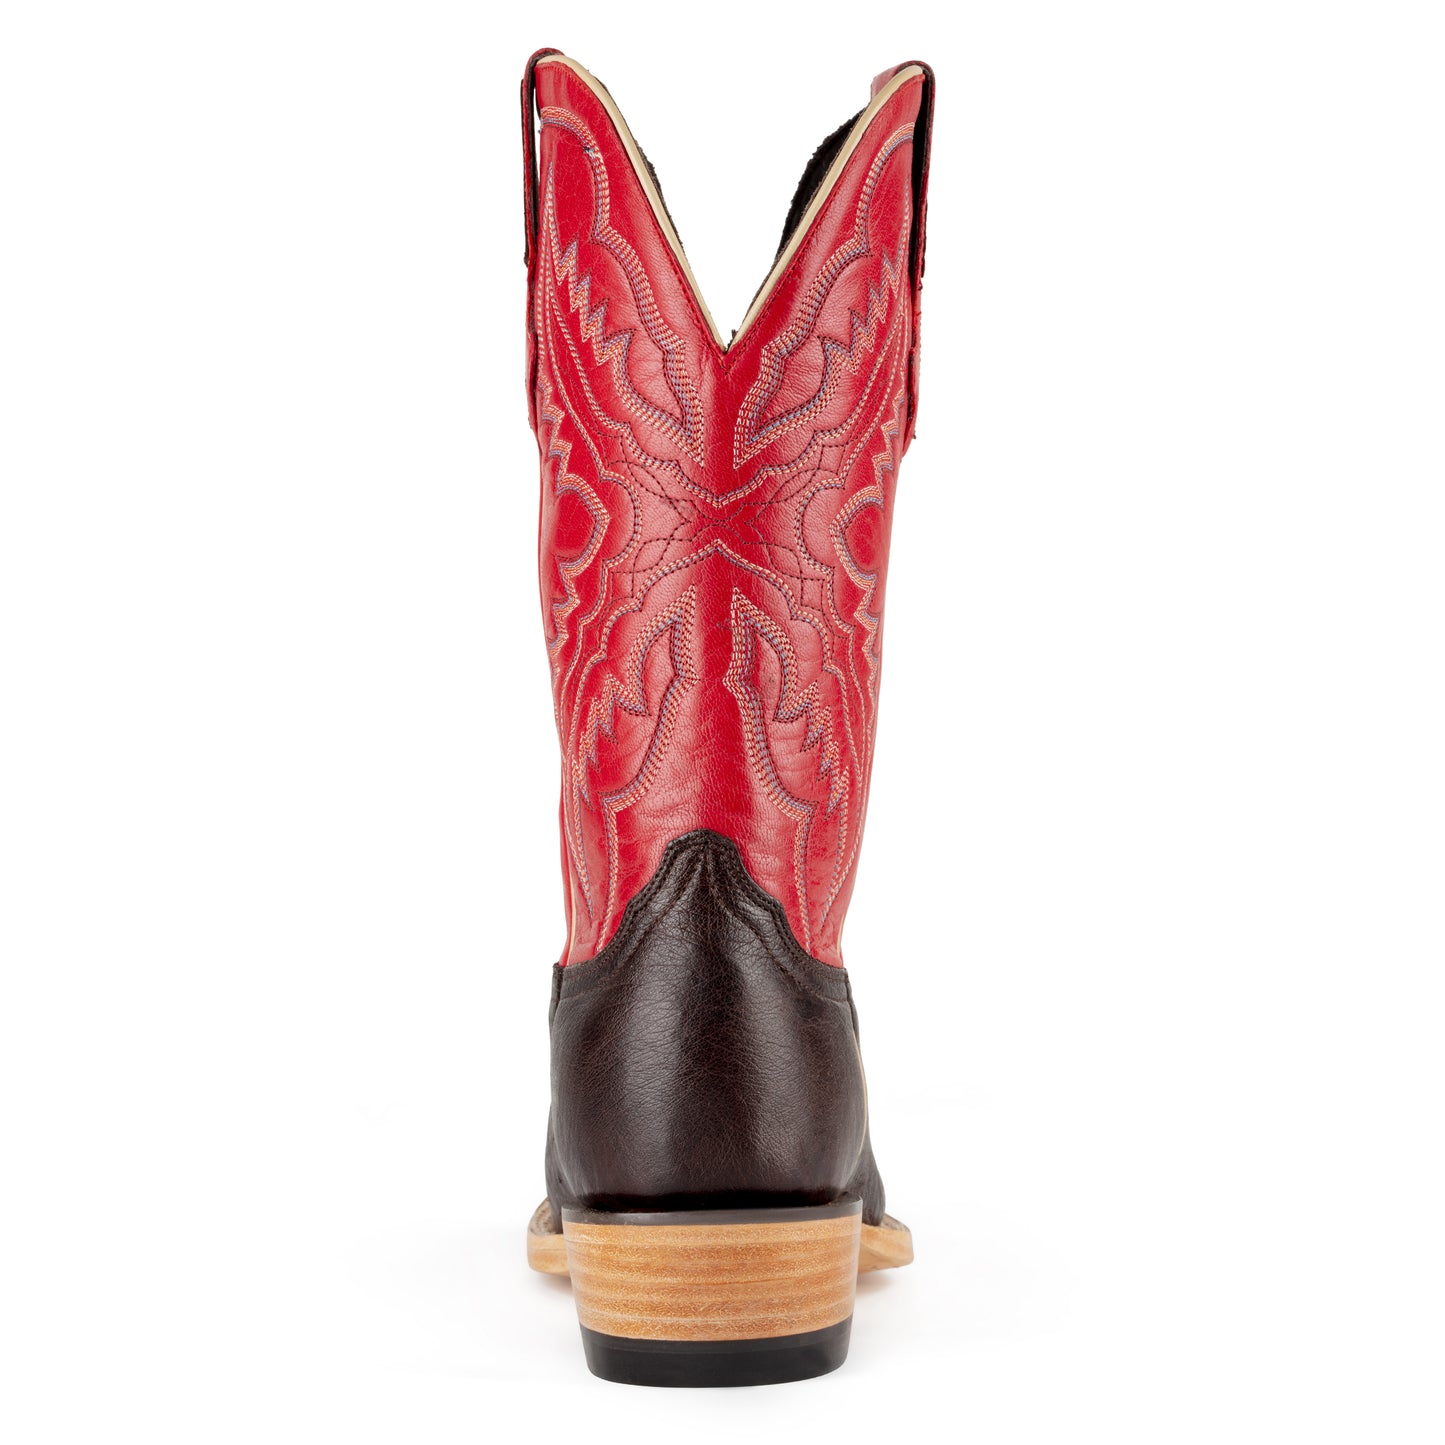 Resistol Boots - Smooth Quill Ostrich - Cutter Toe - Nicotine